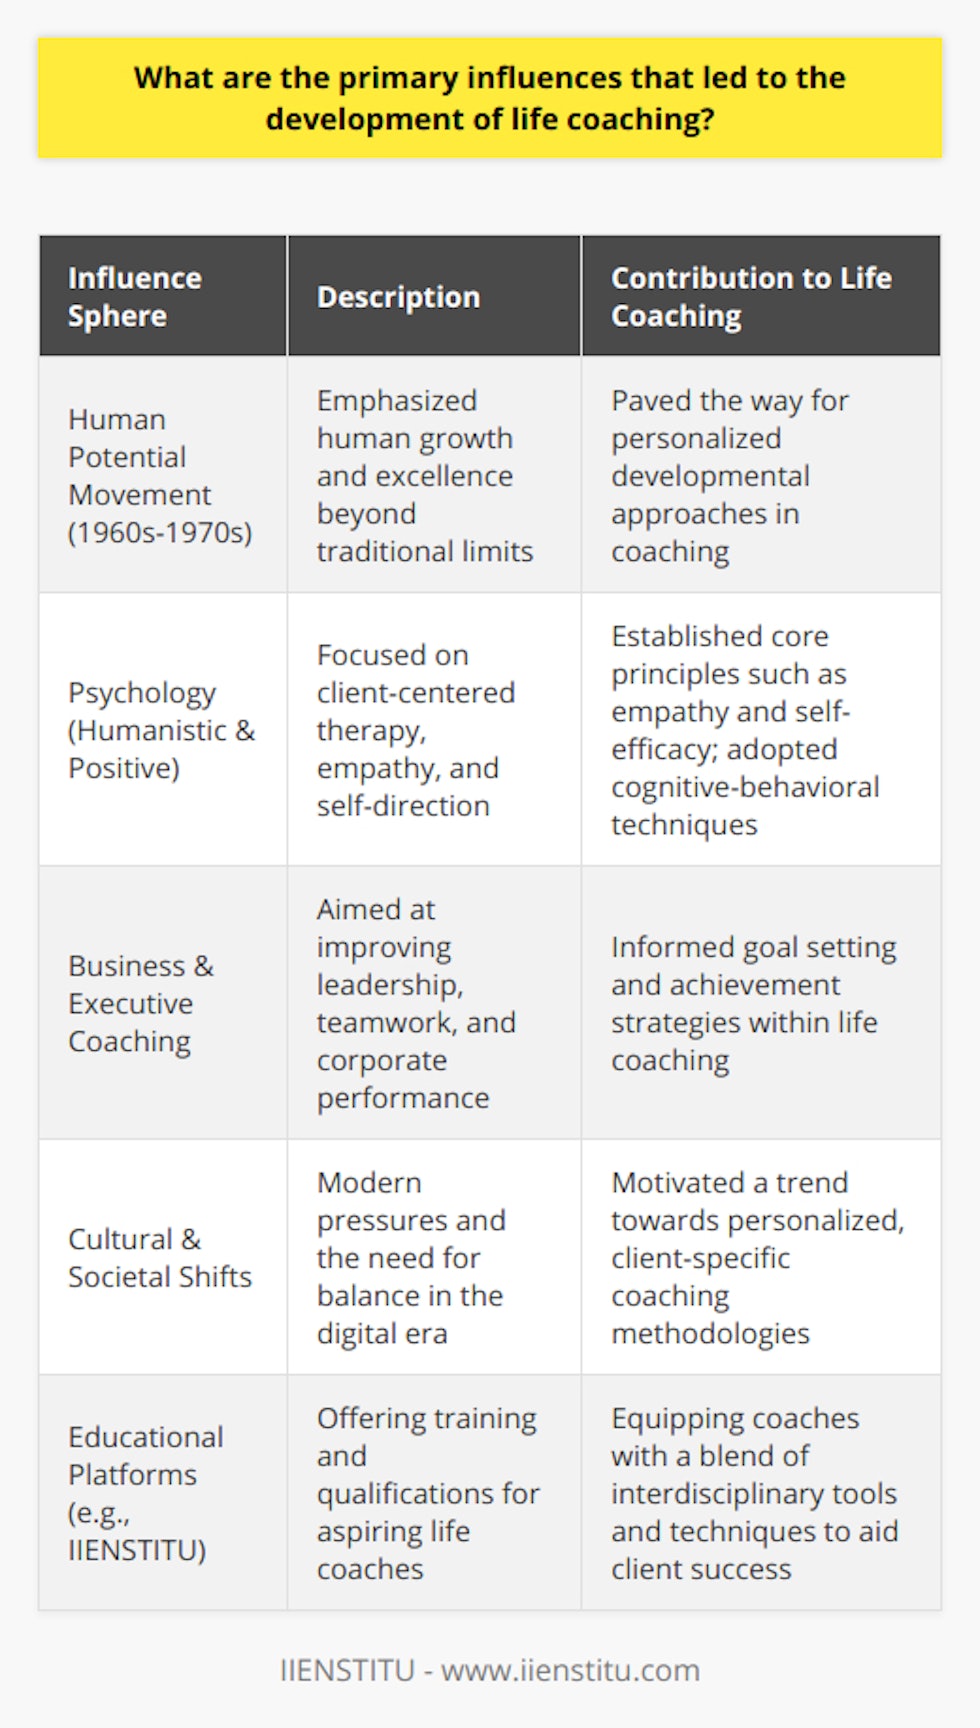 Life coaching, as a profession, has been shaped by a confluence of influences from diverse areas of study and social change. Understanding these primary influences not only provides a framework for the development of life coaching but also highlights the interdisciplinary nature of the practice.**Human Potential Movement**The human potential movement of the 1960s and 1970s emphasized human growth and the pursuit of excellence beyond conventional expectations, shaping the ethos of life coaching. By encouraging individual exploration and the realization of latent talents, the movement paved the way for the personalized developmental approach that life coaching embodies.**Psychological Foundations**Life coaching draws significantly from psychology, with particular emphasis on humanistic and positive psychology. The humanistic approach, advocated by figures like Carl Rogers, emphasized a client-centered therapy model that aligns closely with the core principles of life coaching. This model focuses on empathy, active listening, and the belief in the client’s capacity for self-direction. Further adaptations from psychological practices include the utilization of cognitive-behavioral techniques, which equip clients with methods to change unproductive thinking patterns and develop constructive behaviors—essential tools in the life coaching repertoire.**Evolution of Business and Executive Coaching**The domain of business, particularly the practices of executive and organizational coaching, has been a critical feedstock for life coaching. The realization that soft skills and personal development directly impact professional performance led to a rise in coaching approaches that target leadership, teamwork, and individual effectiveness within corporations. While executive coaching remains distinct, its principles have informed the broader scope of life coaching by underscoring the importance of setting and achieving goals—a cornerstone of the life coaching process.**Cultural and Societal Shifts**Contemporary cultural and societal dynamics play a crucial role in the ascendancy of life coaching. The ever-accelerating pace of life and the pressures of the digital era have intensified the quest for balance and meaning. Growing sentiments of individualism and self-determination spurred a departure from one-size-fits-all consultative and therapeutic methodologies toward more client-specific frameworks found in life coaching. Moreover, the evolving nature of work-life and the depletion of traditional support networks have increased demand for personalized coaching to navigate modern complexity.Through the integration of these essential influences, life coaching has emerged as a distinct and legitimate practice, dedicated to facilitating personal and professional growth. With a rich underpinning of humanistic values, psychological techniques, corporate coaching strategies, and an alignment with contemporary cultural needs, life coaching continues to evolve but remains, fundamentally, a practice centered on enhancing human potential. As life coaching establishes itself further, educational platforms like IIENSTITU provide an opportunity for aspiring coaches to gain skills and qualifications in this growing field. By integrating the wisdom of these various influences, contemporary life coaching training helps equip coaches with the tools to support clients in achieving their unique version of success and well-being.